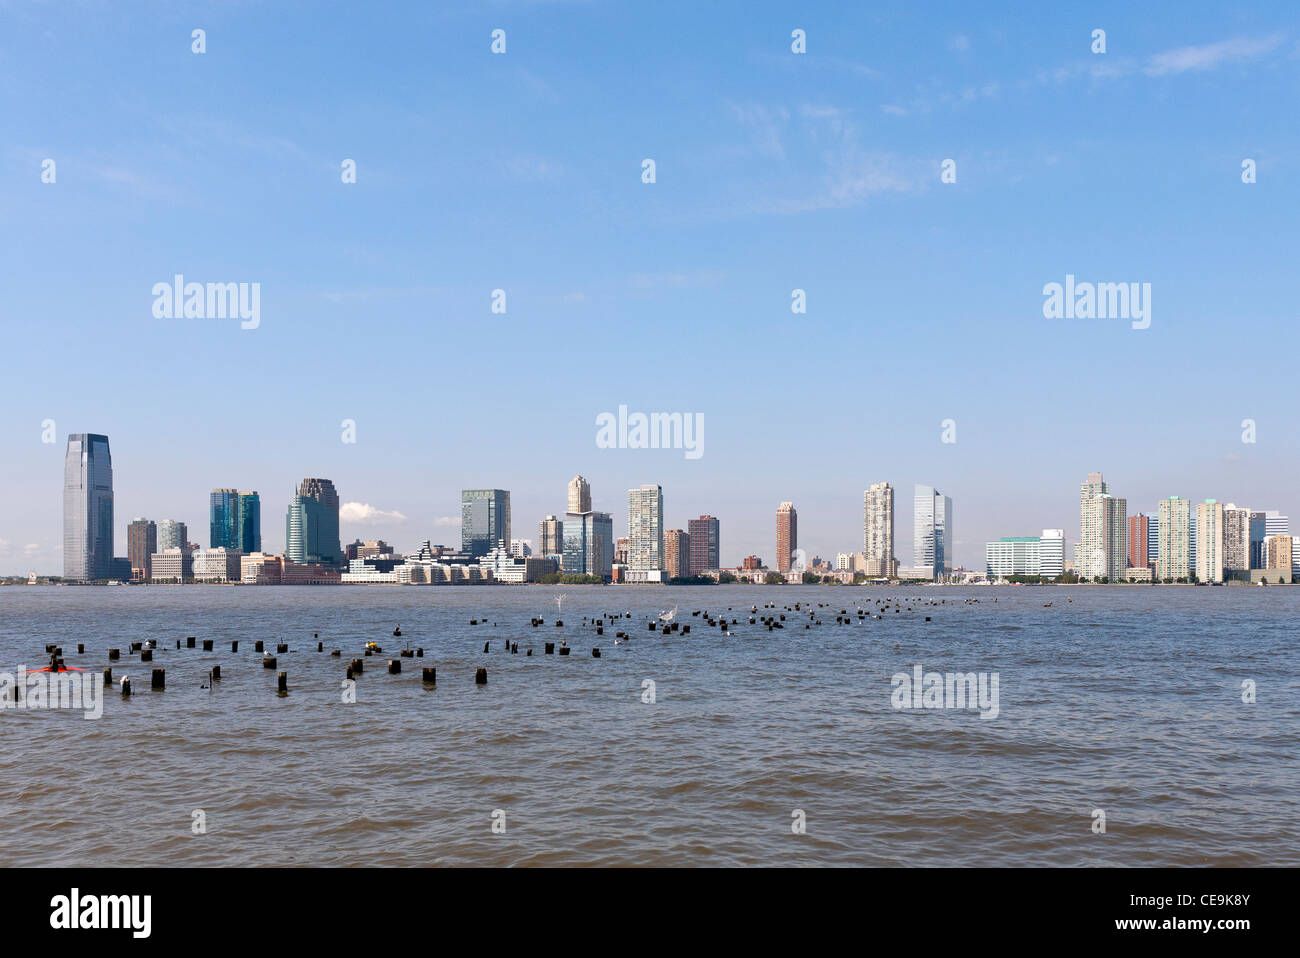 A view of the Jersey City, New Jersey skyline from across the Hudson River and the New York City Pier 25. Stock Photo